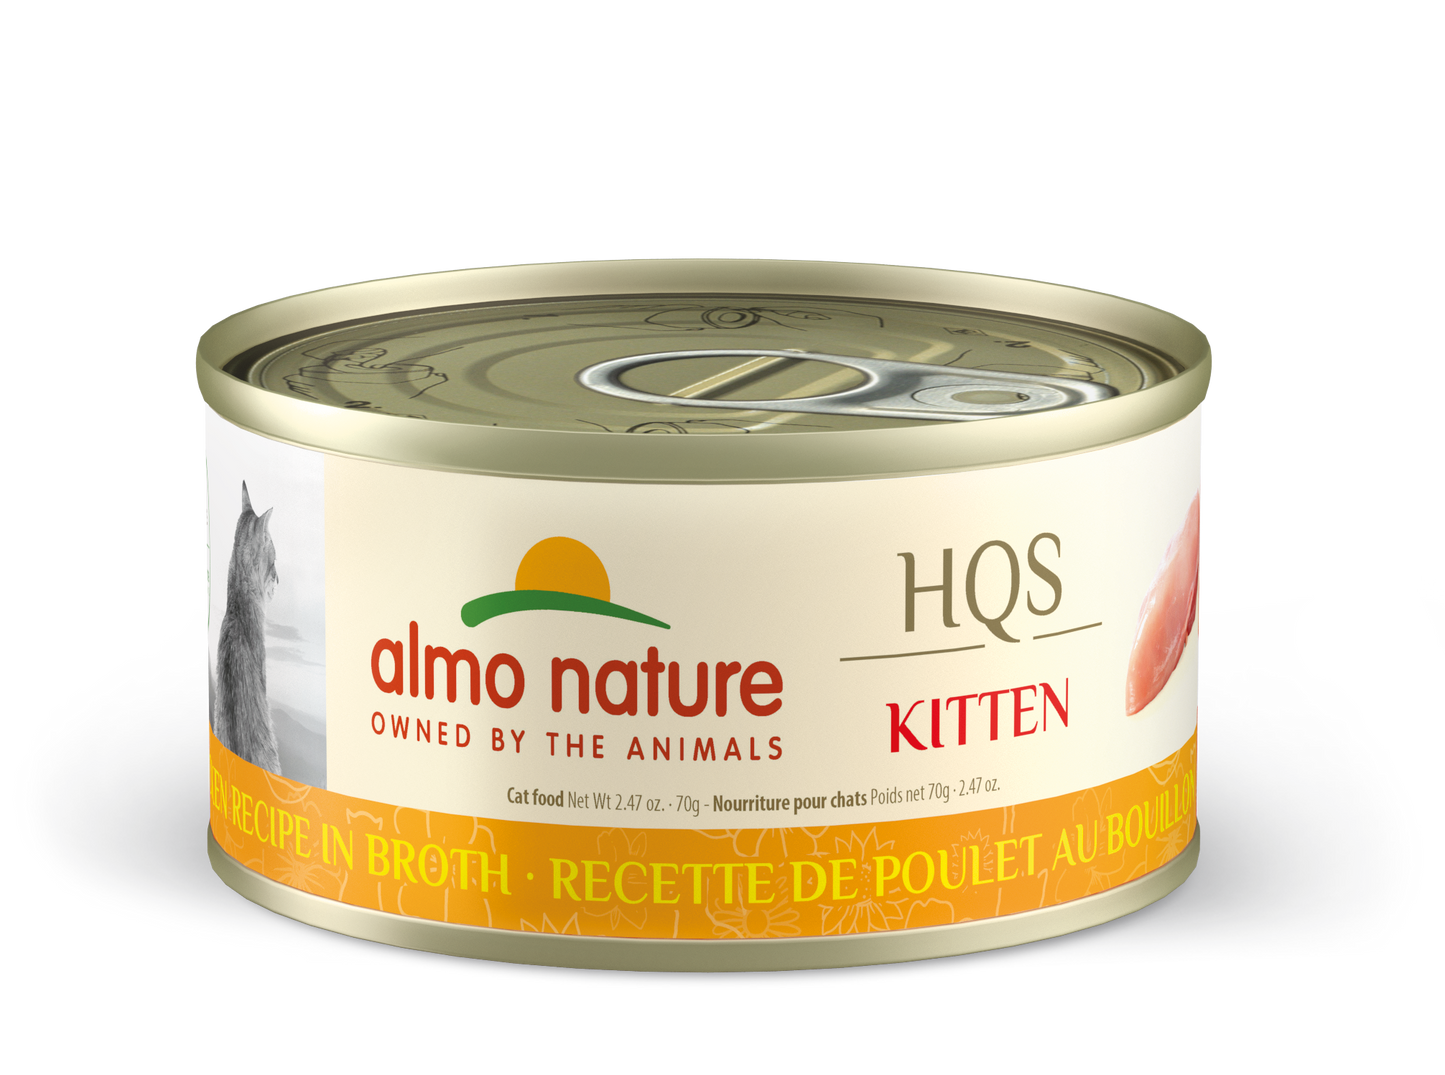 Almo Nature HQS Natural Kitten Chicken Recipe in Broth Cat Can (70g) - Tail Blazers Etobicoke